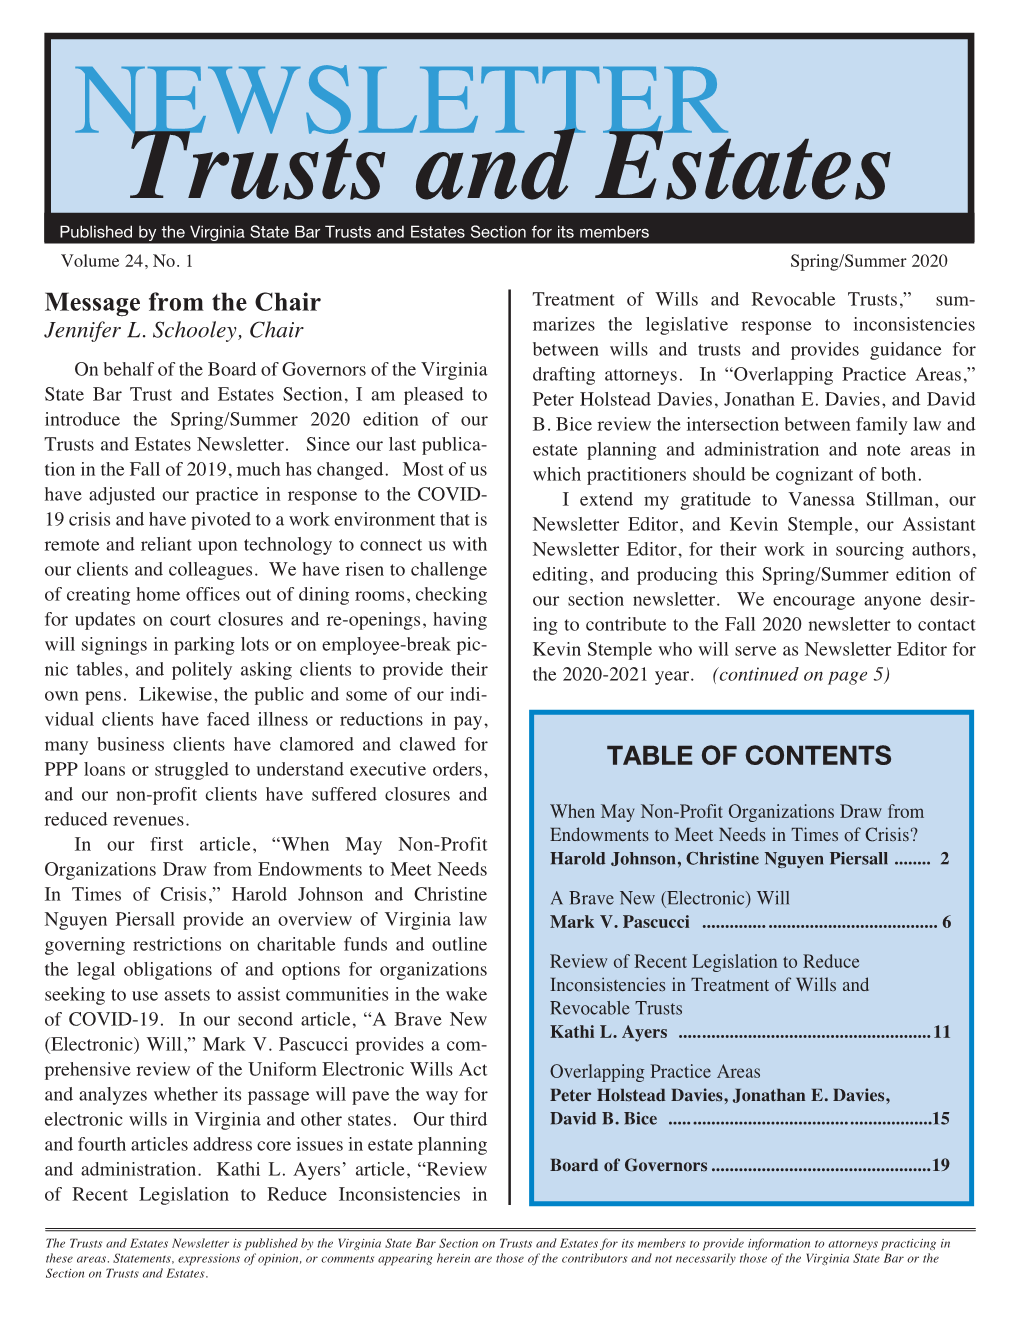 NEWSLETTER Trusts and Estates Published by the Virginia State Bar Trusts and Estates Section for Its Members Volume 24, No